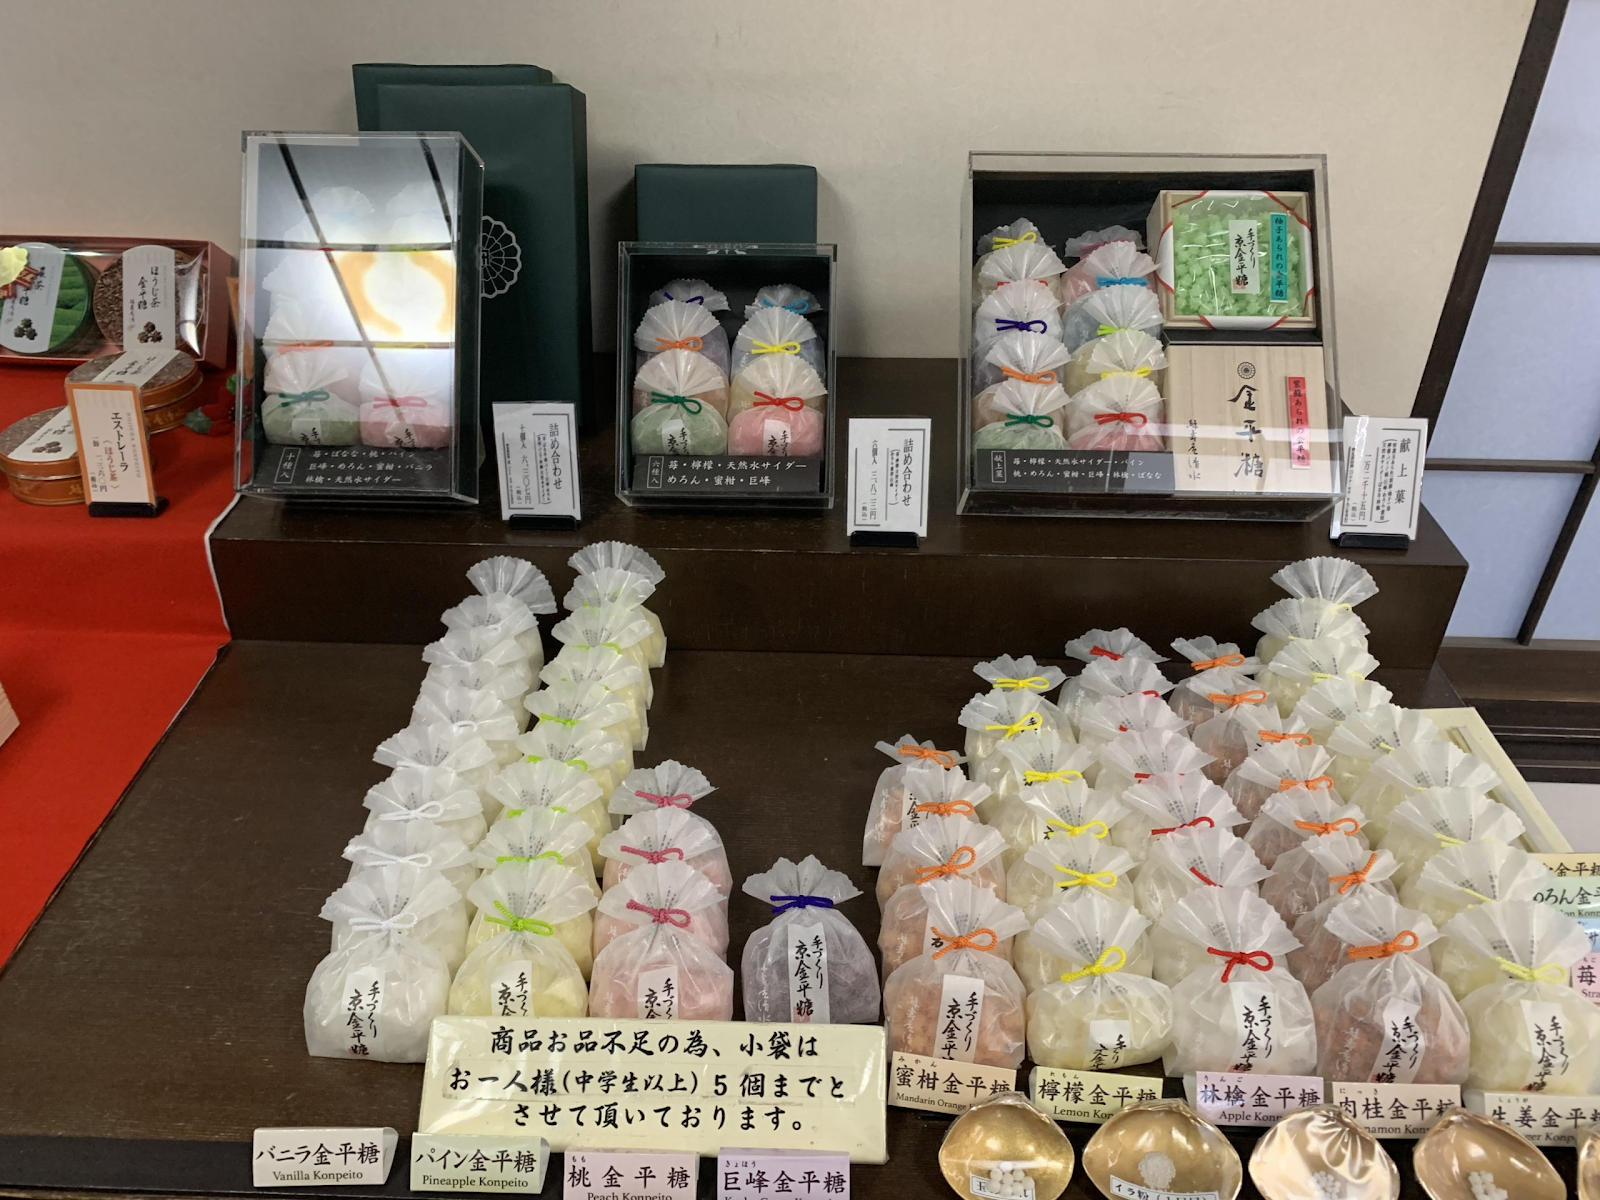 A variety of konpeito star candy can be found in traditional Japanese candy stores.